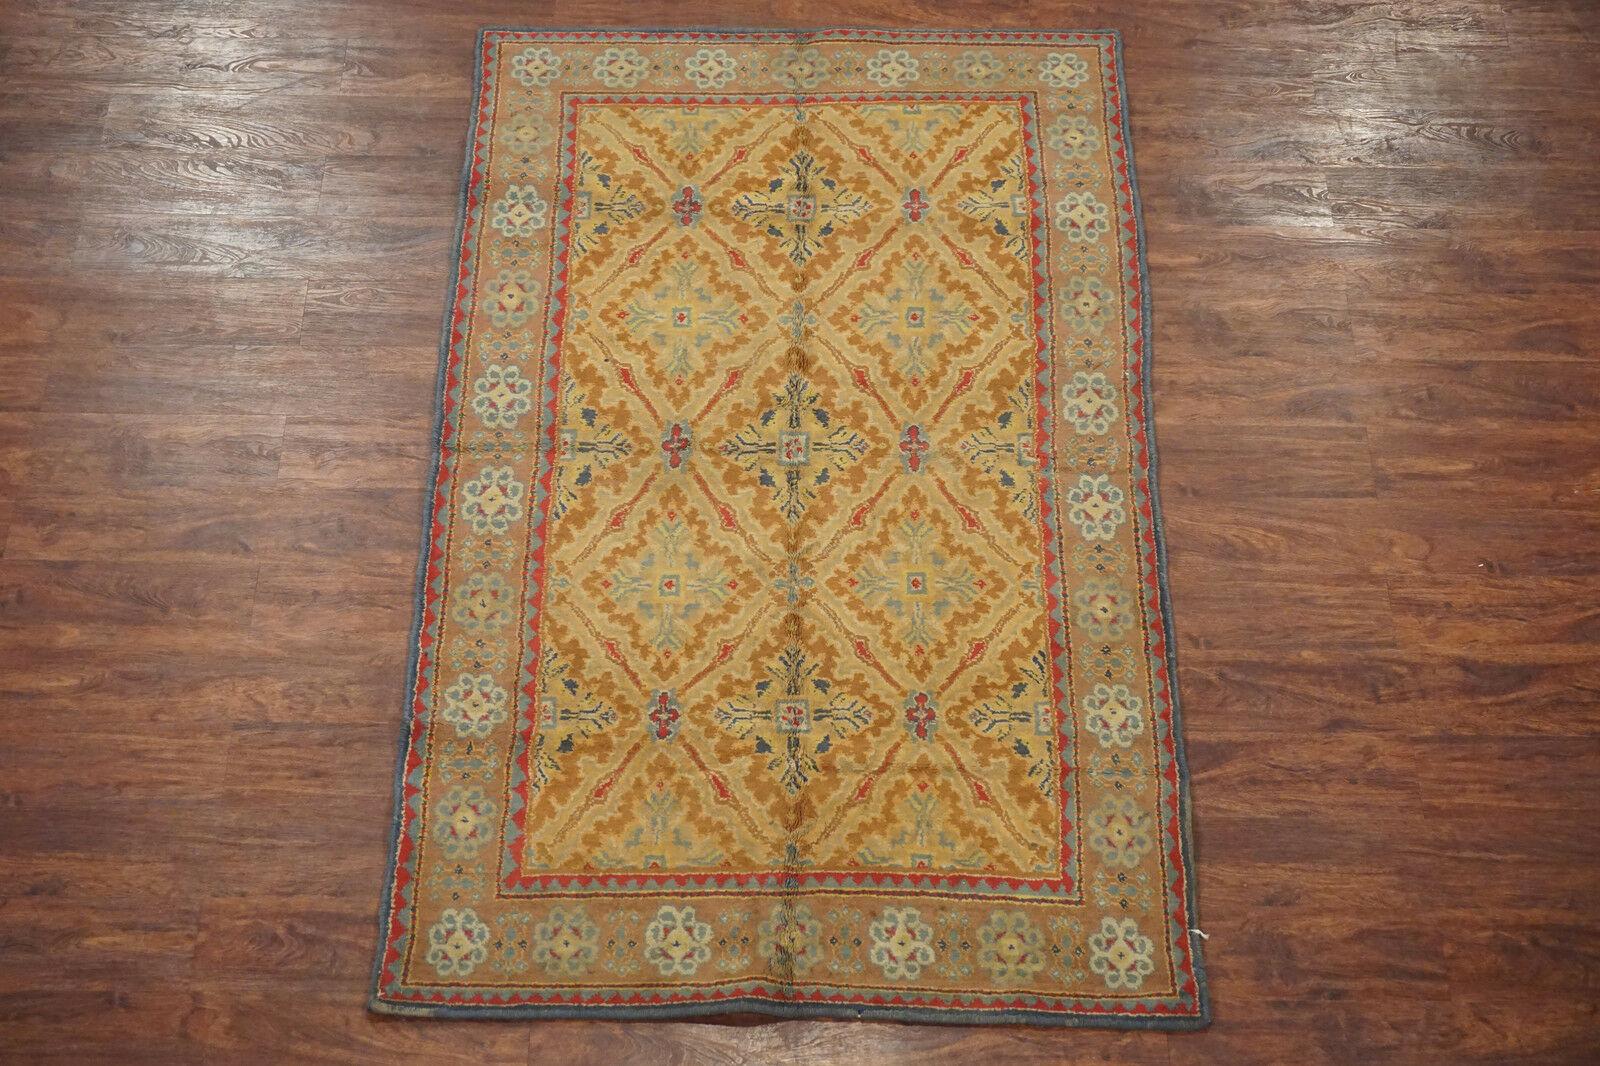 Hand-knotted cotton pile on a cotton foundation.

Circa 1920.

Dimensions: 3'11